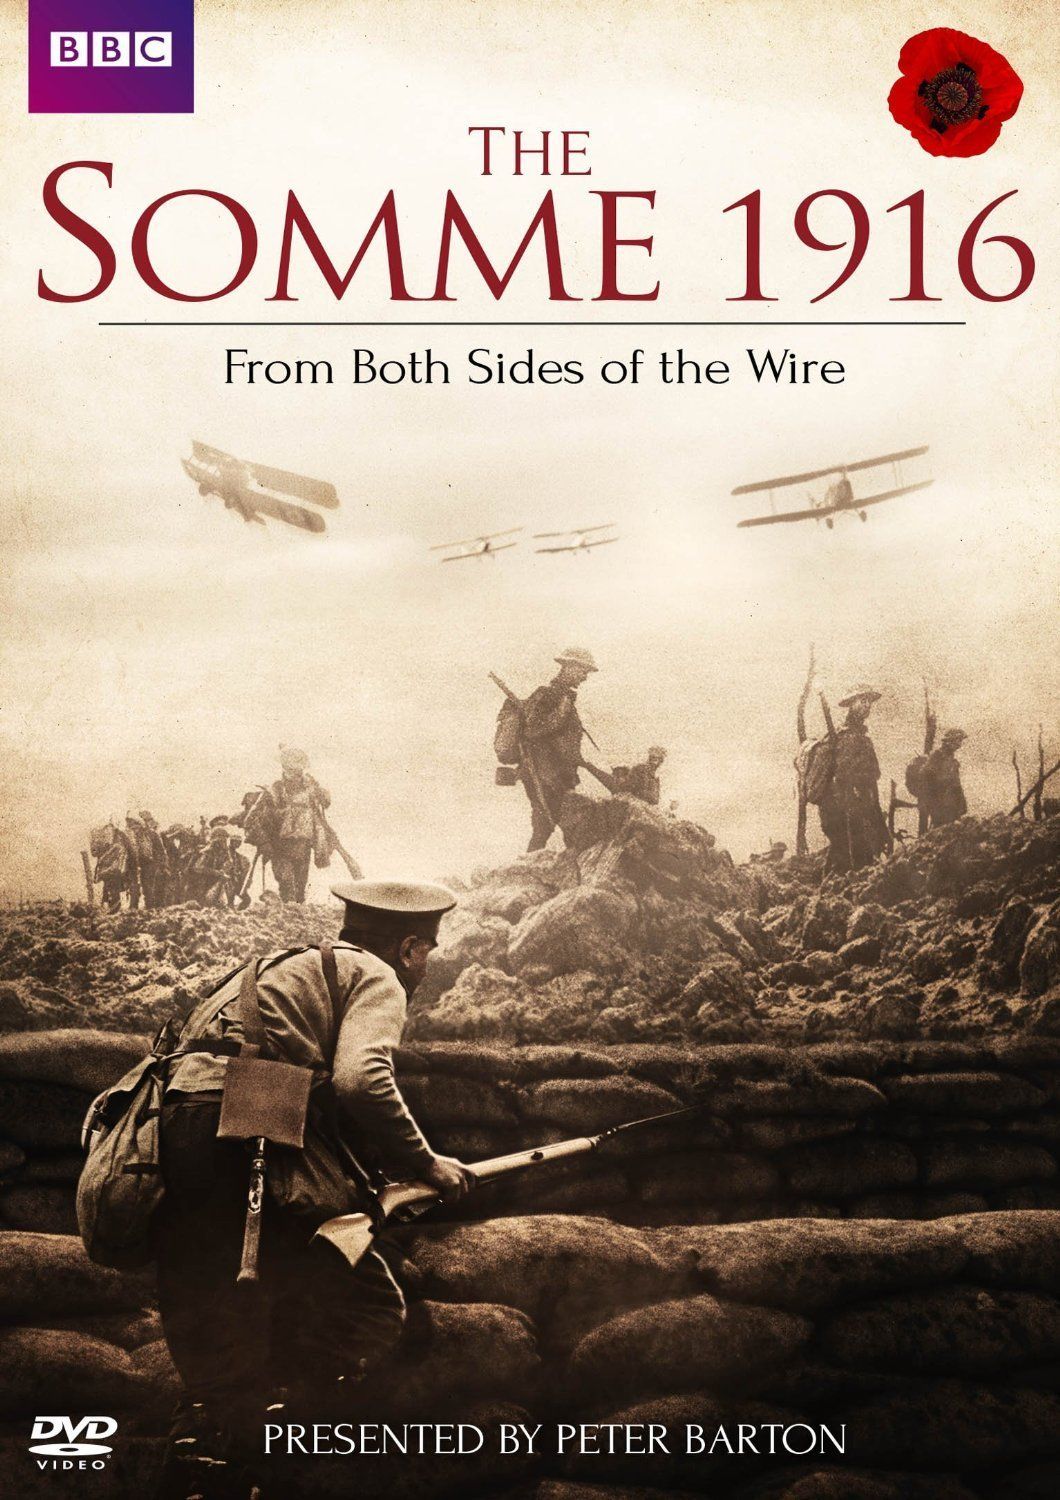 The Somme 1916 - From Both Sides of the Wire ne zaman